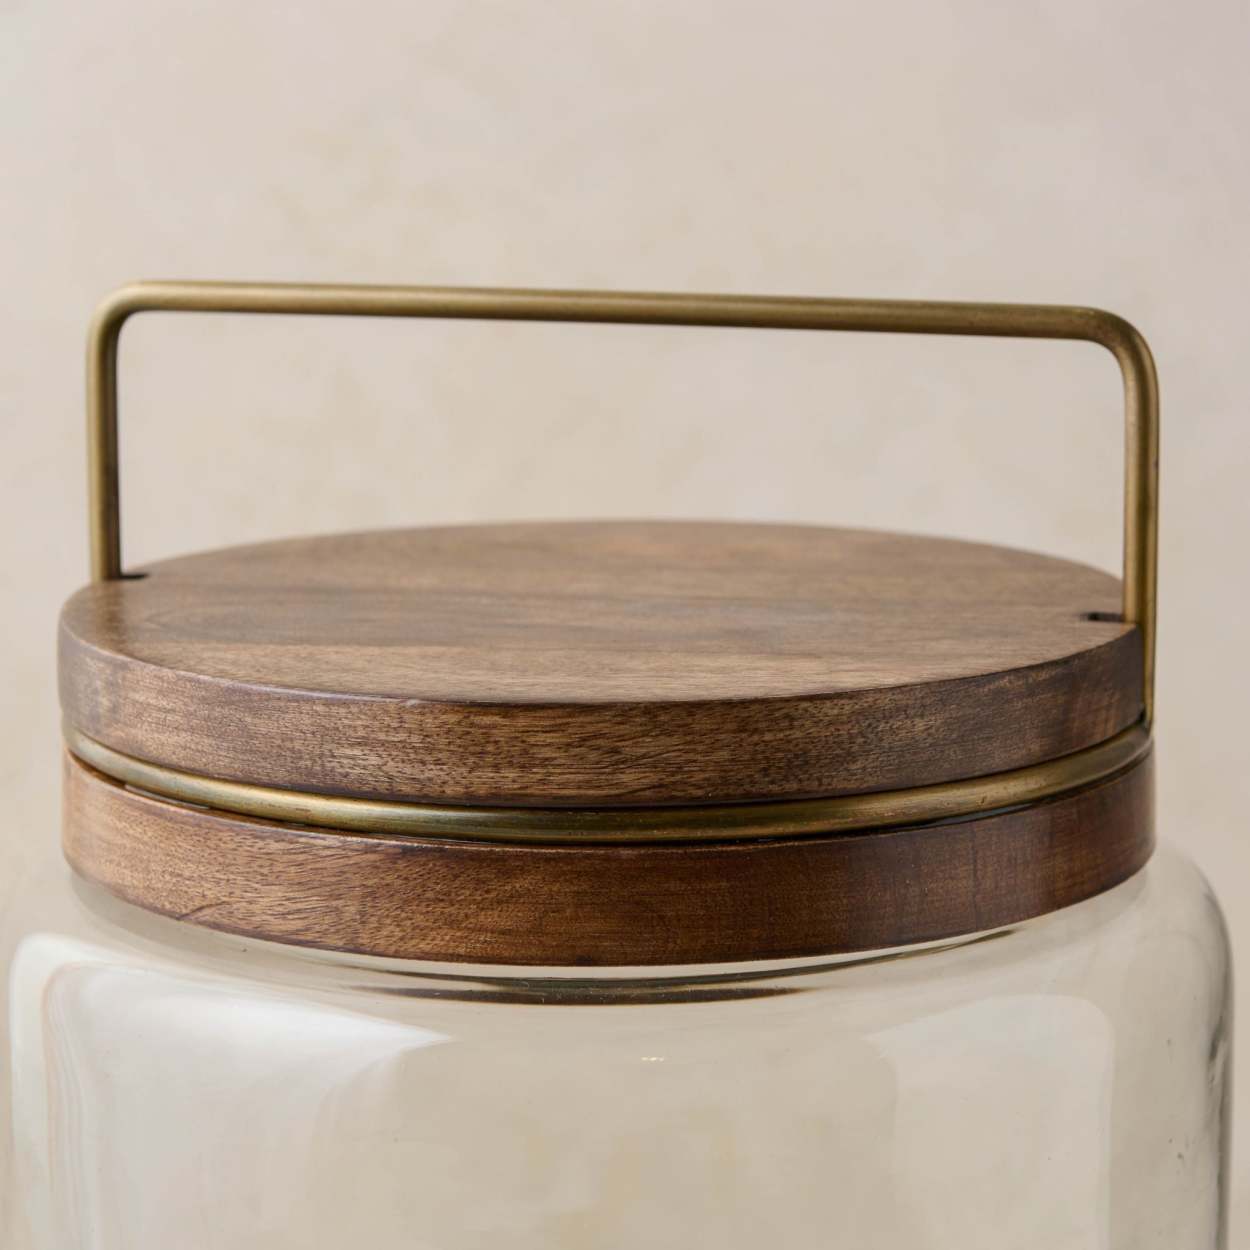 Antique Brass and Glass Canister - Magnolia